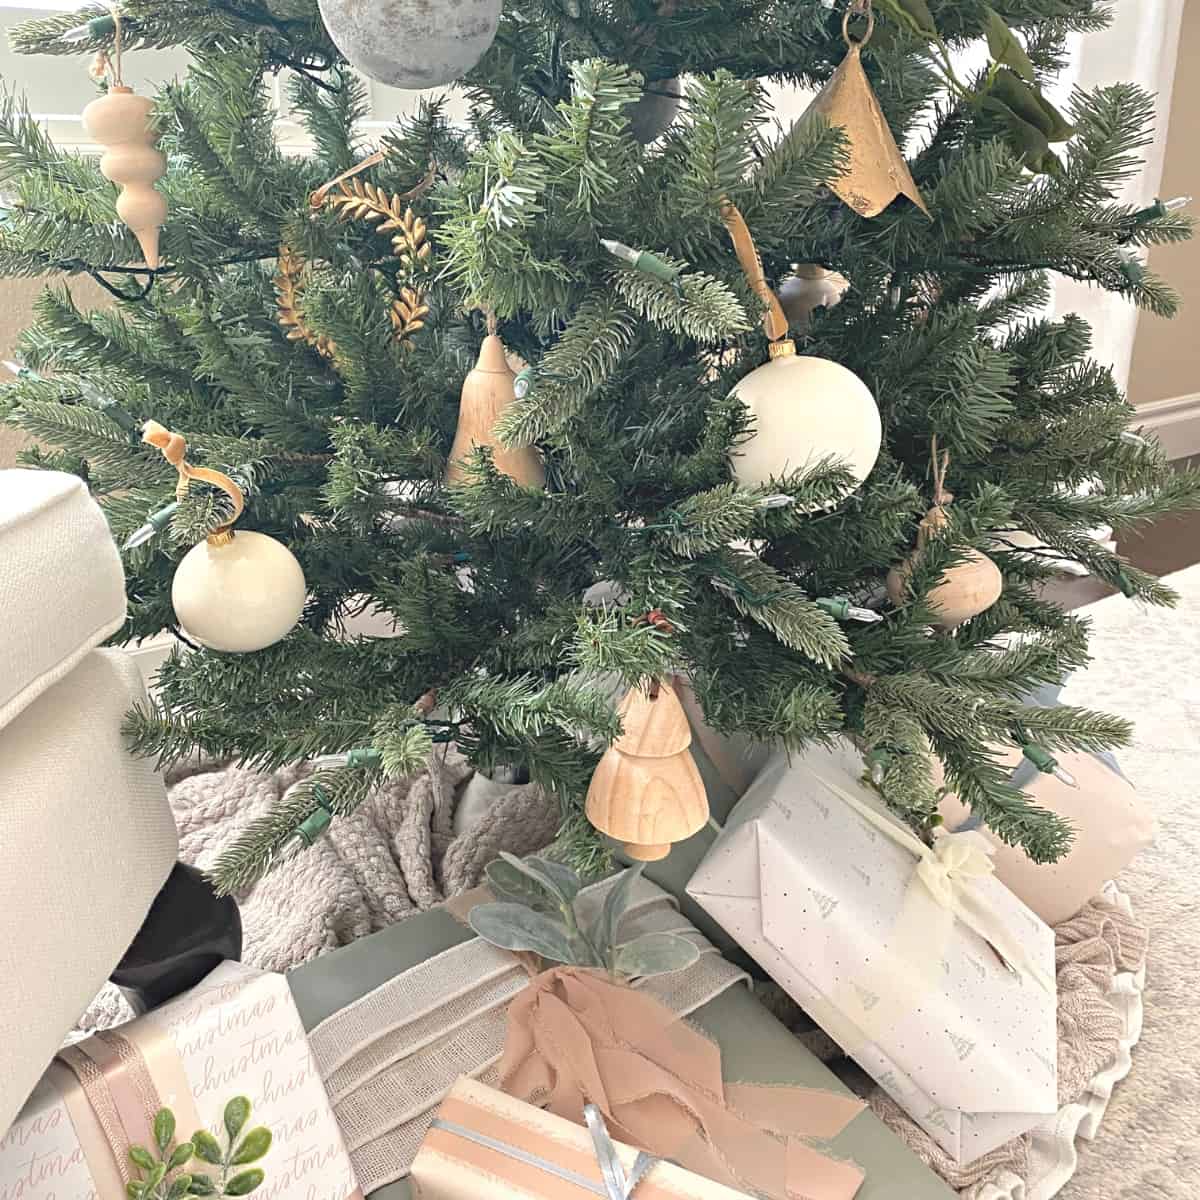 Mid-Christmas tree decorated in neutral ornaments with gifts wrapped in neutral wrapping paper below